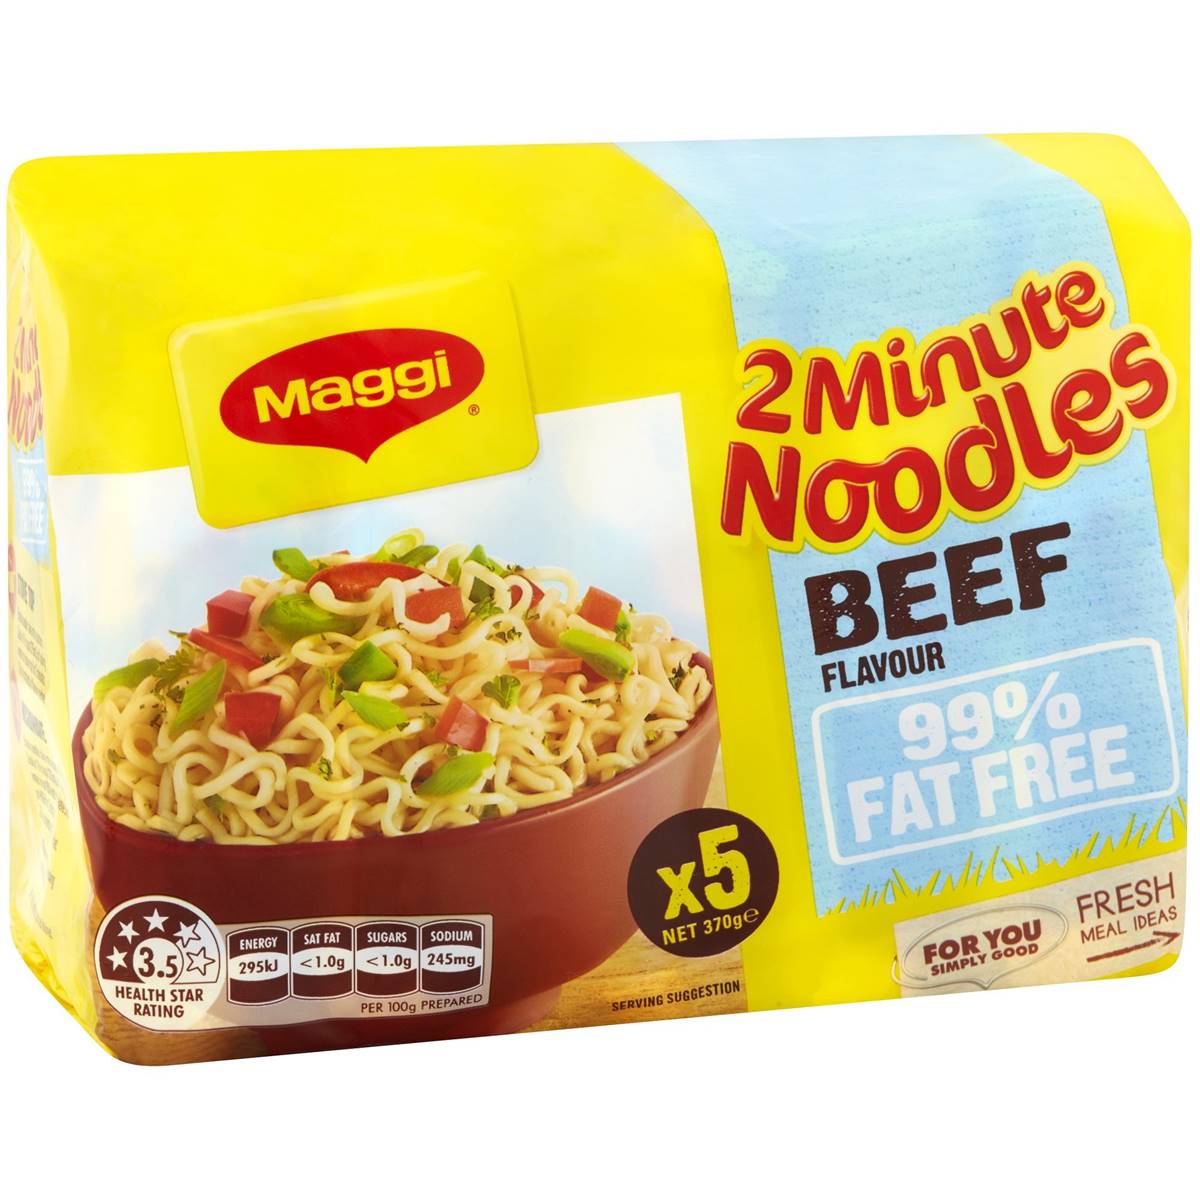 Maggi Beef 2 Minute Noodles 99% Fat Free